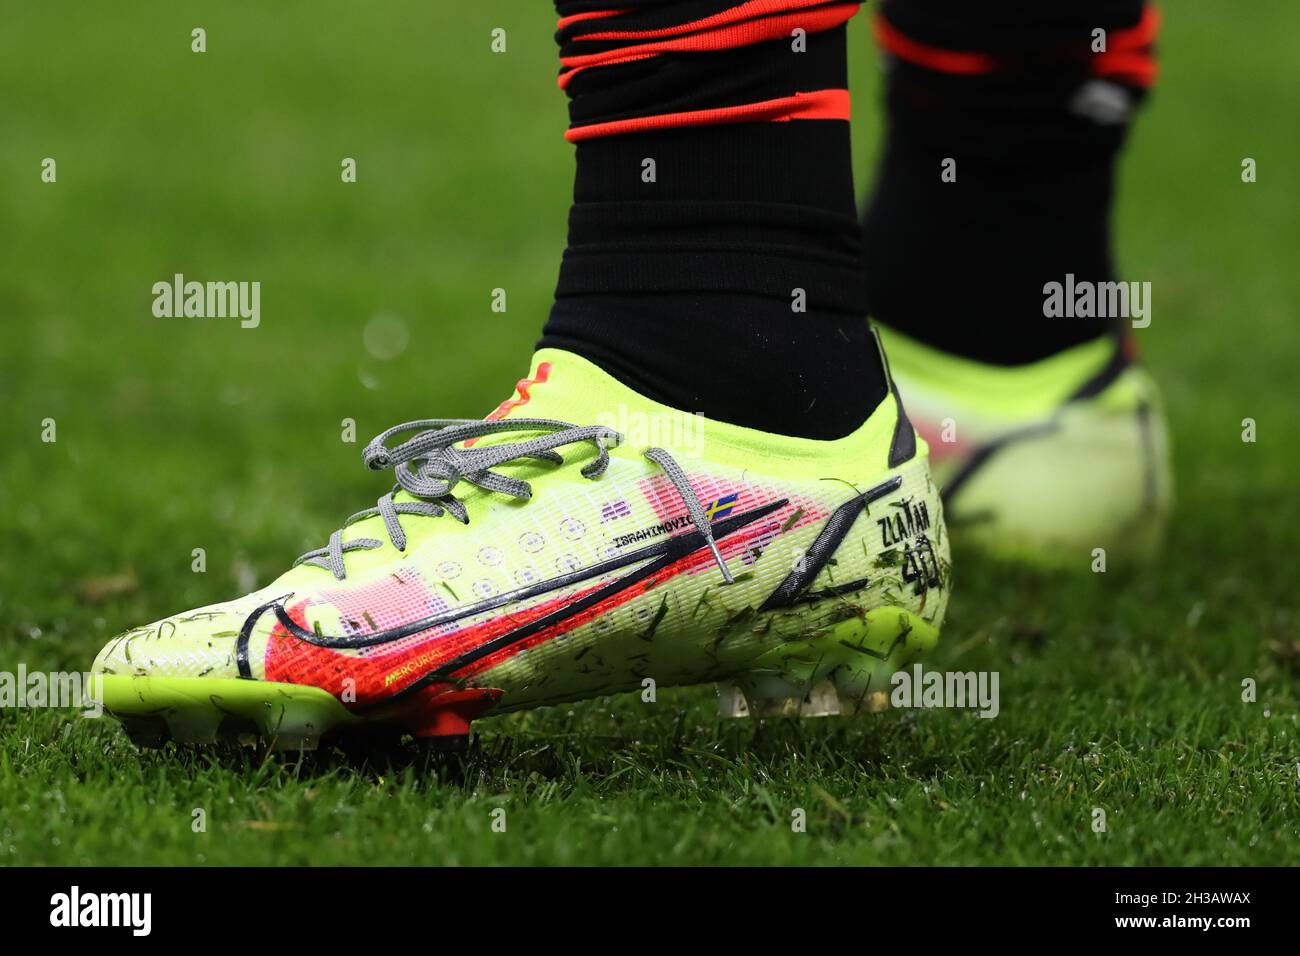 Milan, Italy, 26th October 2021. Zlatan Ibrahimovic of AC Milan's  personalised football boots show a number 40 to celebrate his recent  birthday during the warm up prior to the Serie A match